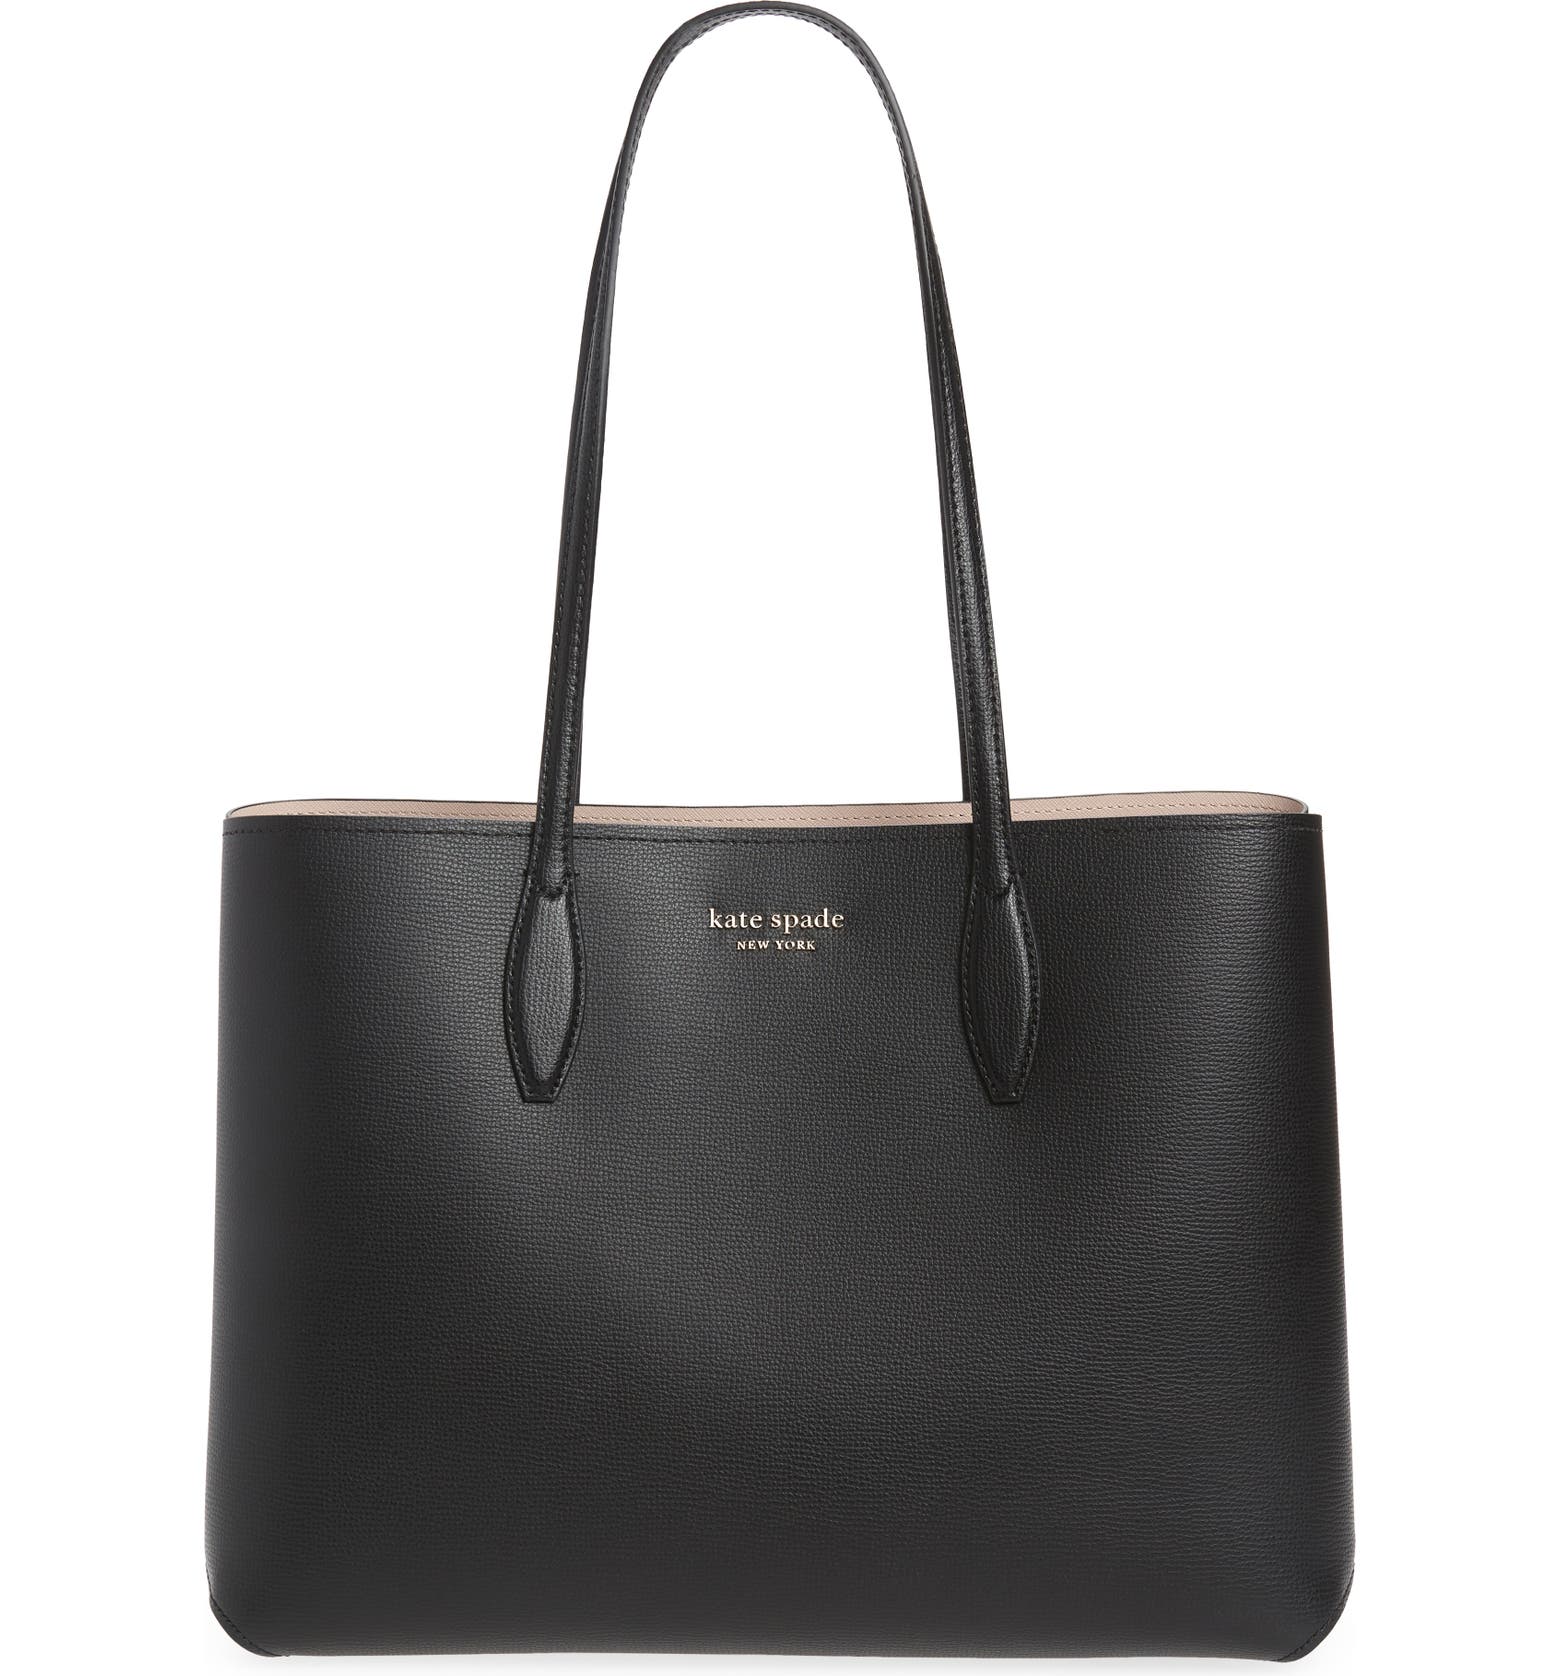 Black All Day tote from Kate Spade